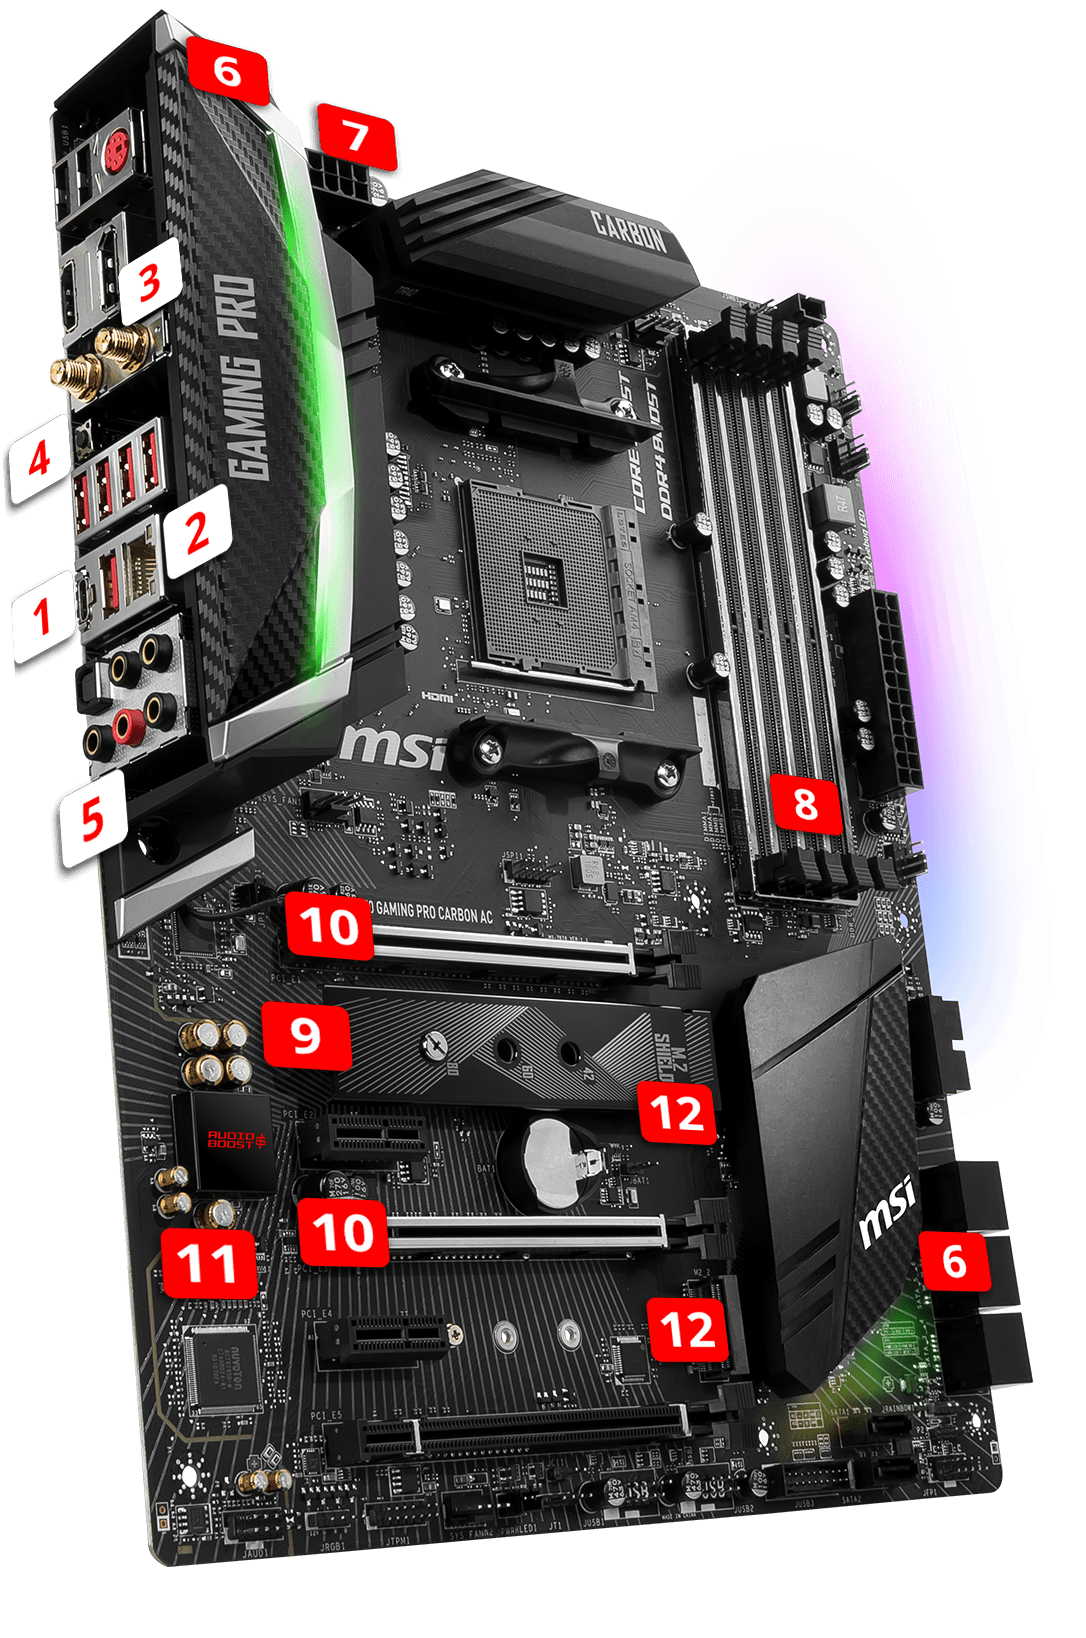 MSI X470 GAMING PRO CARBON AC overview